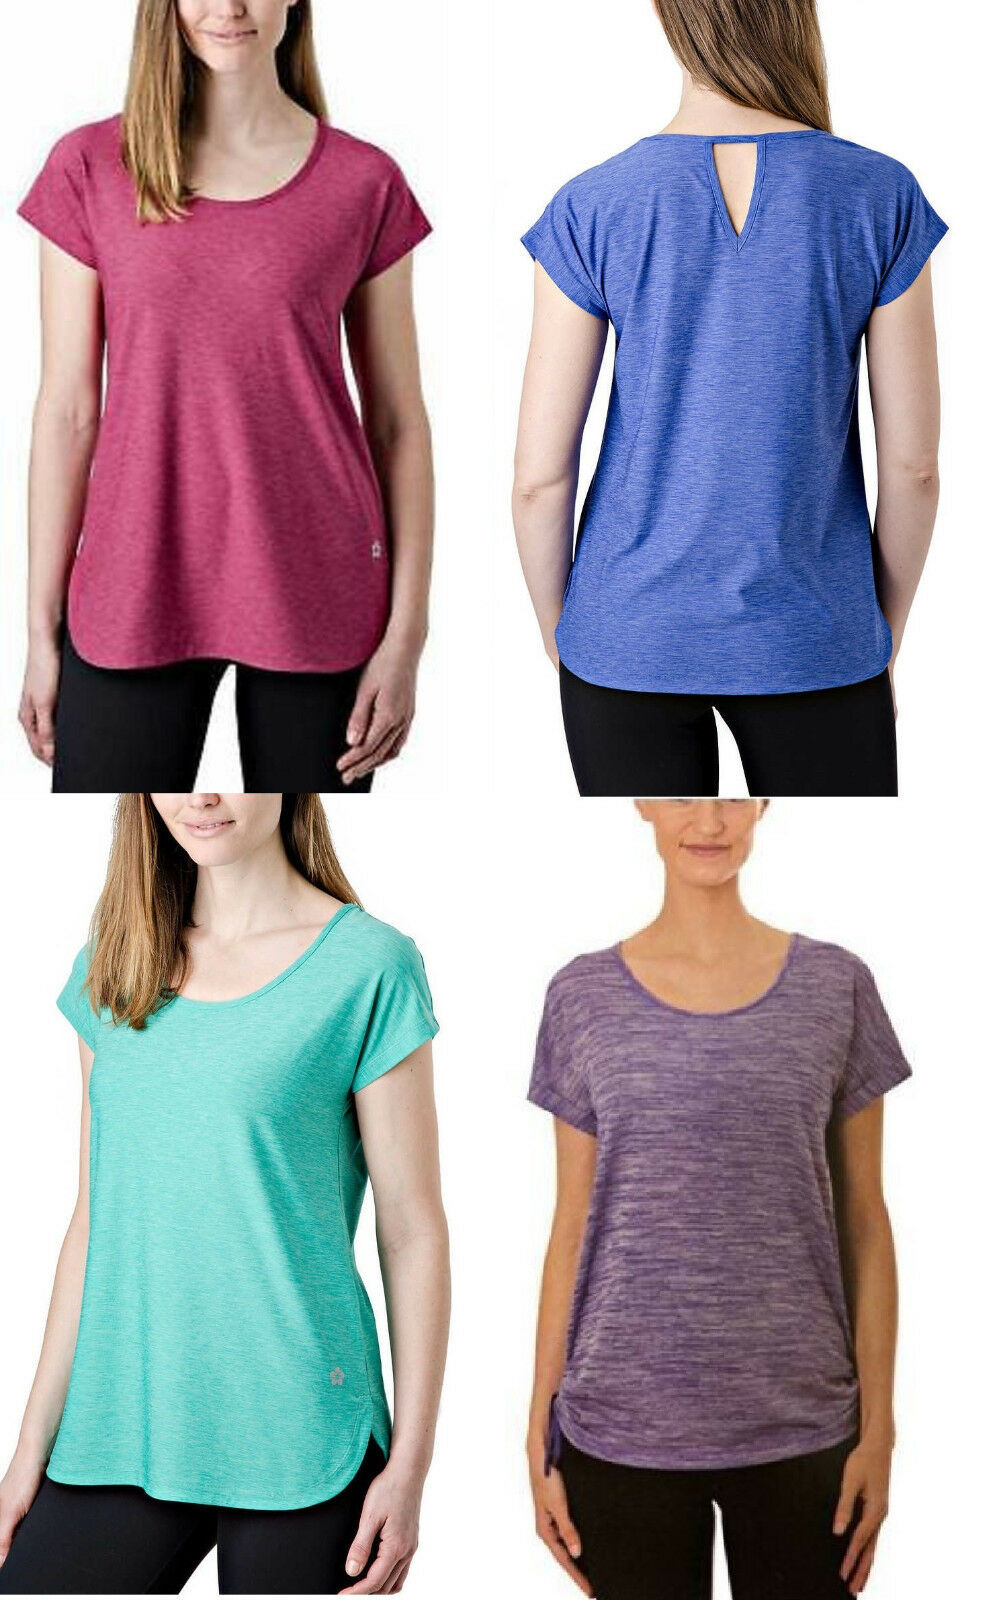 Tuff Athletics Women's Active Yoga Key Hole Tops Variety, Select Size/color, Nwt